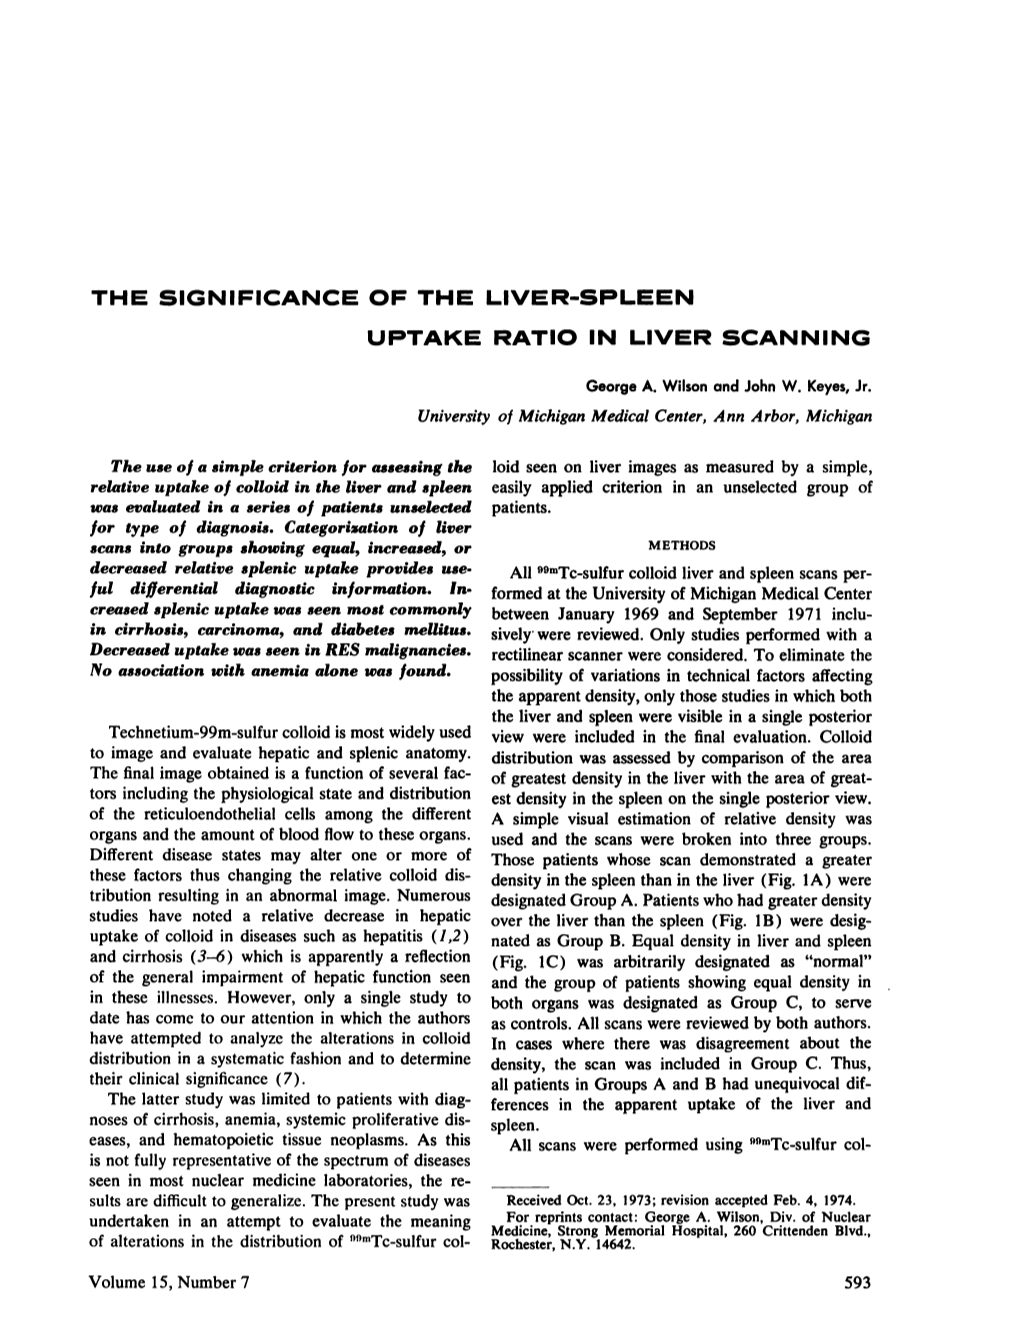 The Significance of the Liver-Spleen Uptake Ratio in Liver Scanning